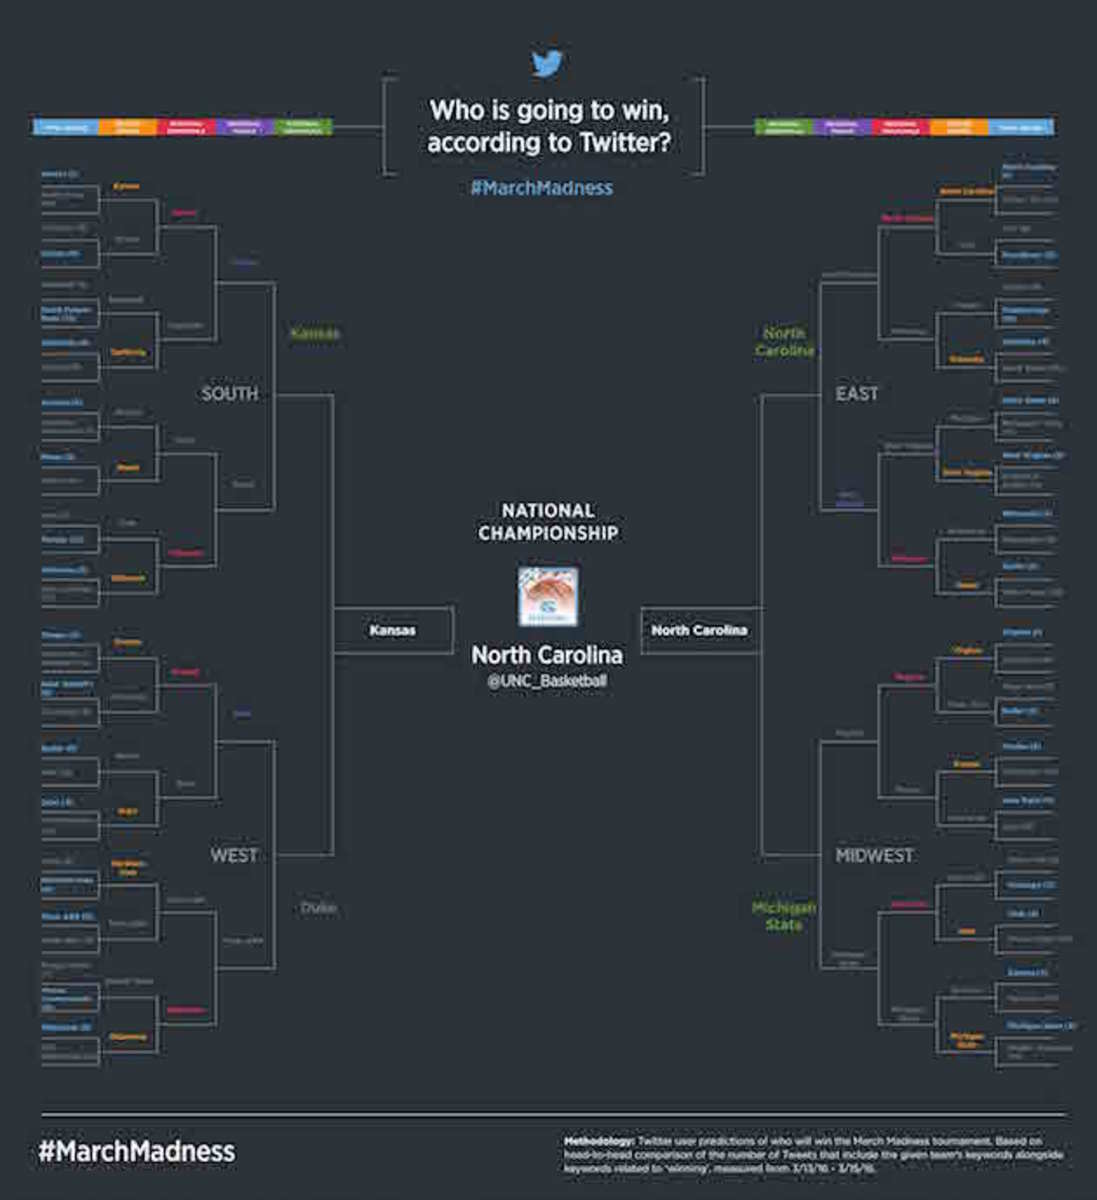 Twitter launches bracket that predicts who will win from tweets